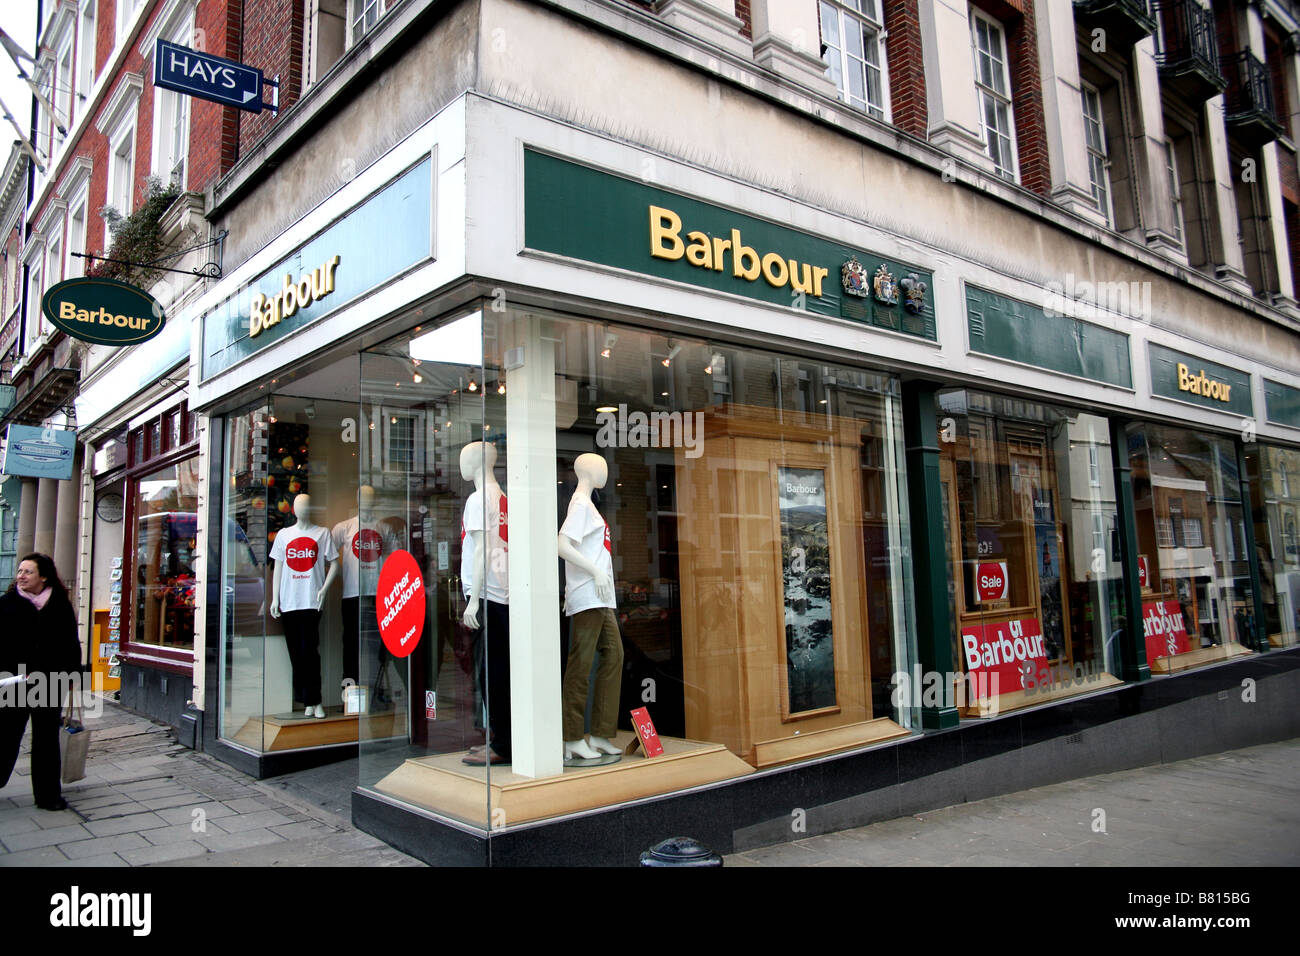 Branch of Barbour clothing stores, Windsor Stock Photo - Alamy